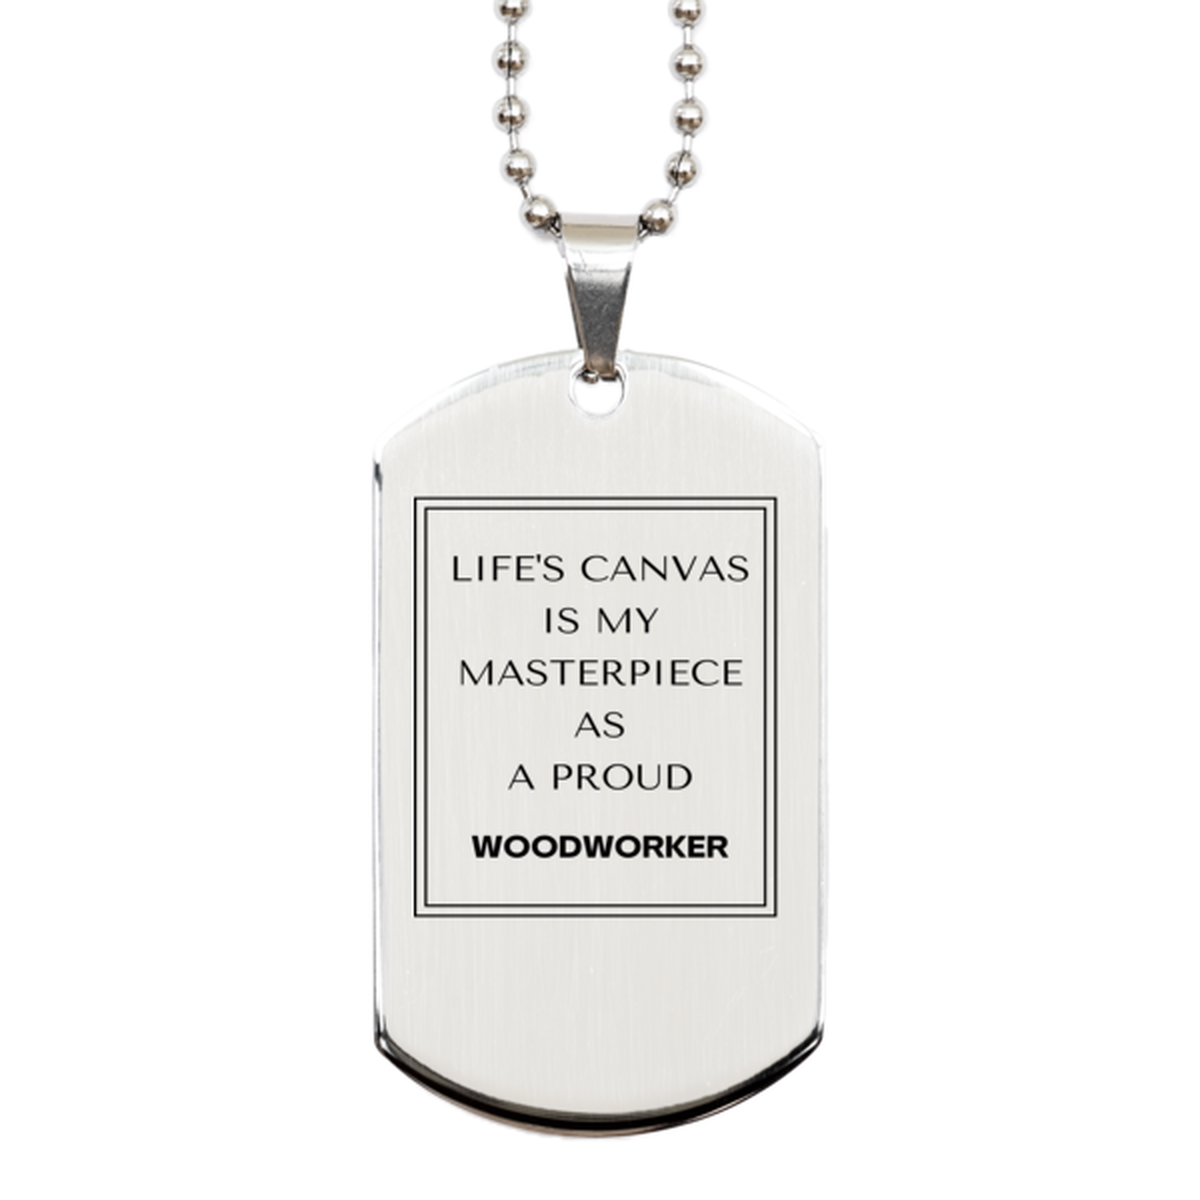 Proud Woodworker Gifts, Life's canvas is my masterpiece, Epic Birthday Christmas Unique Silver Dog Tag For Woodworker, Coworkers, Men, Women, Friends